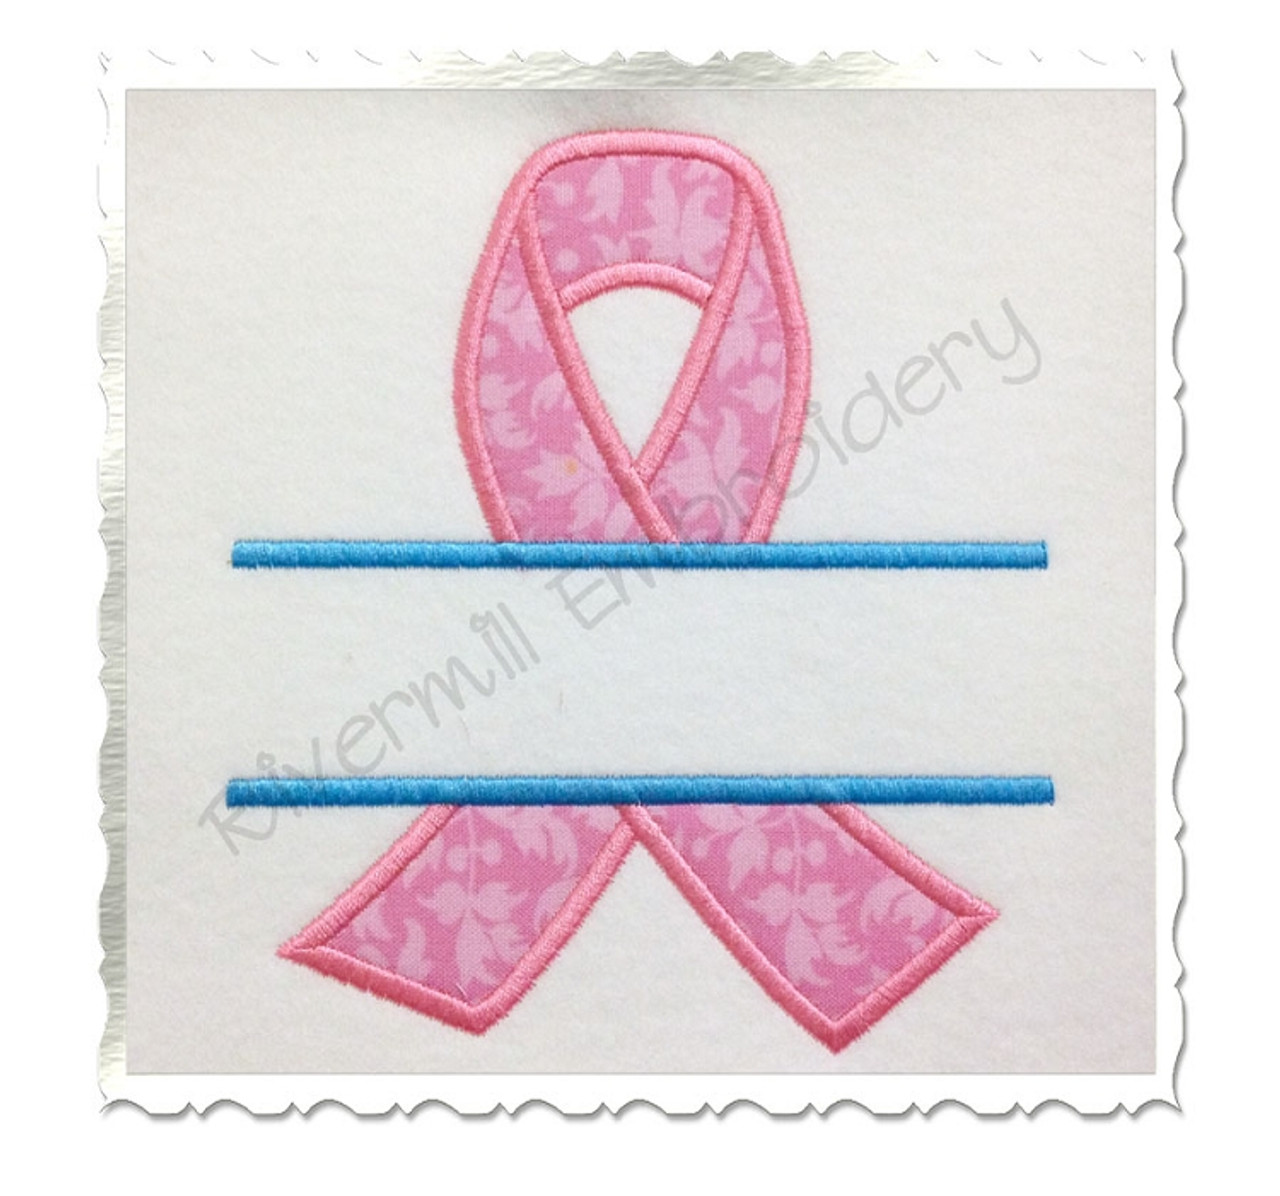 A Beginners' Guide to Silk Ribbon Embroidery - Threads